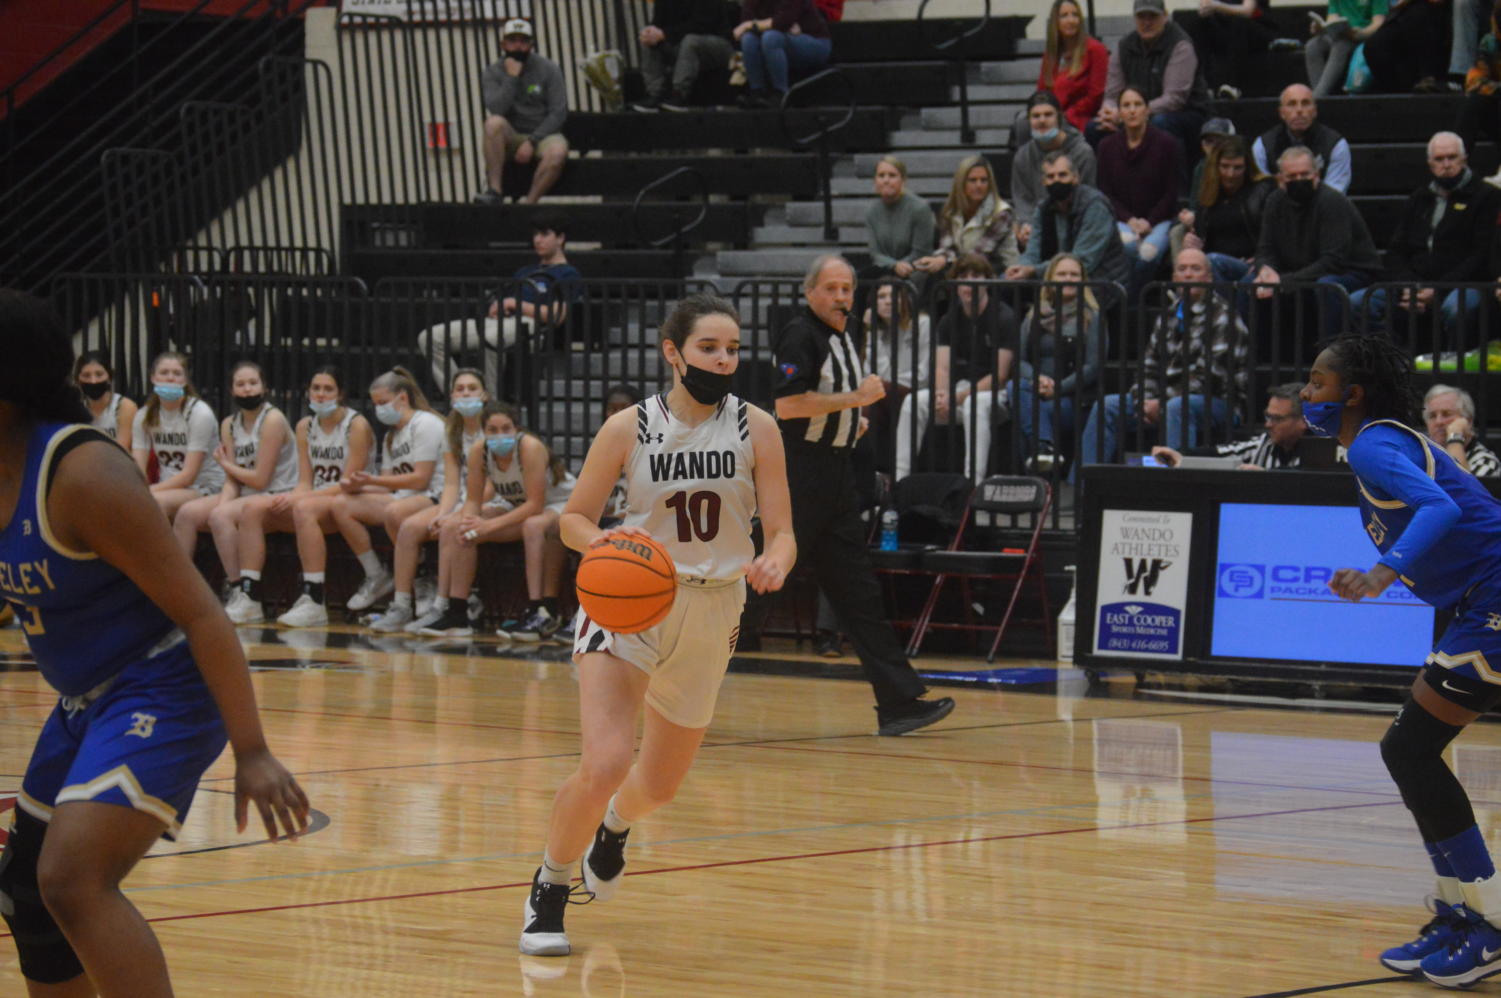 Senior Grace Waite dribbling the ball up the court while her opponent is coming to defend her.
